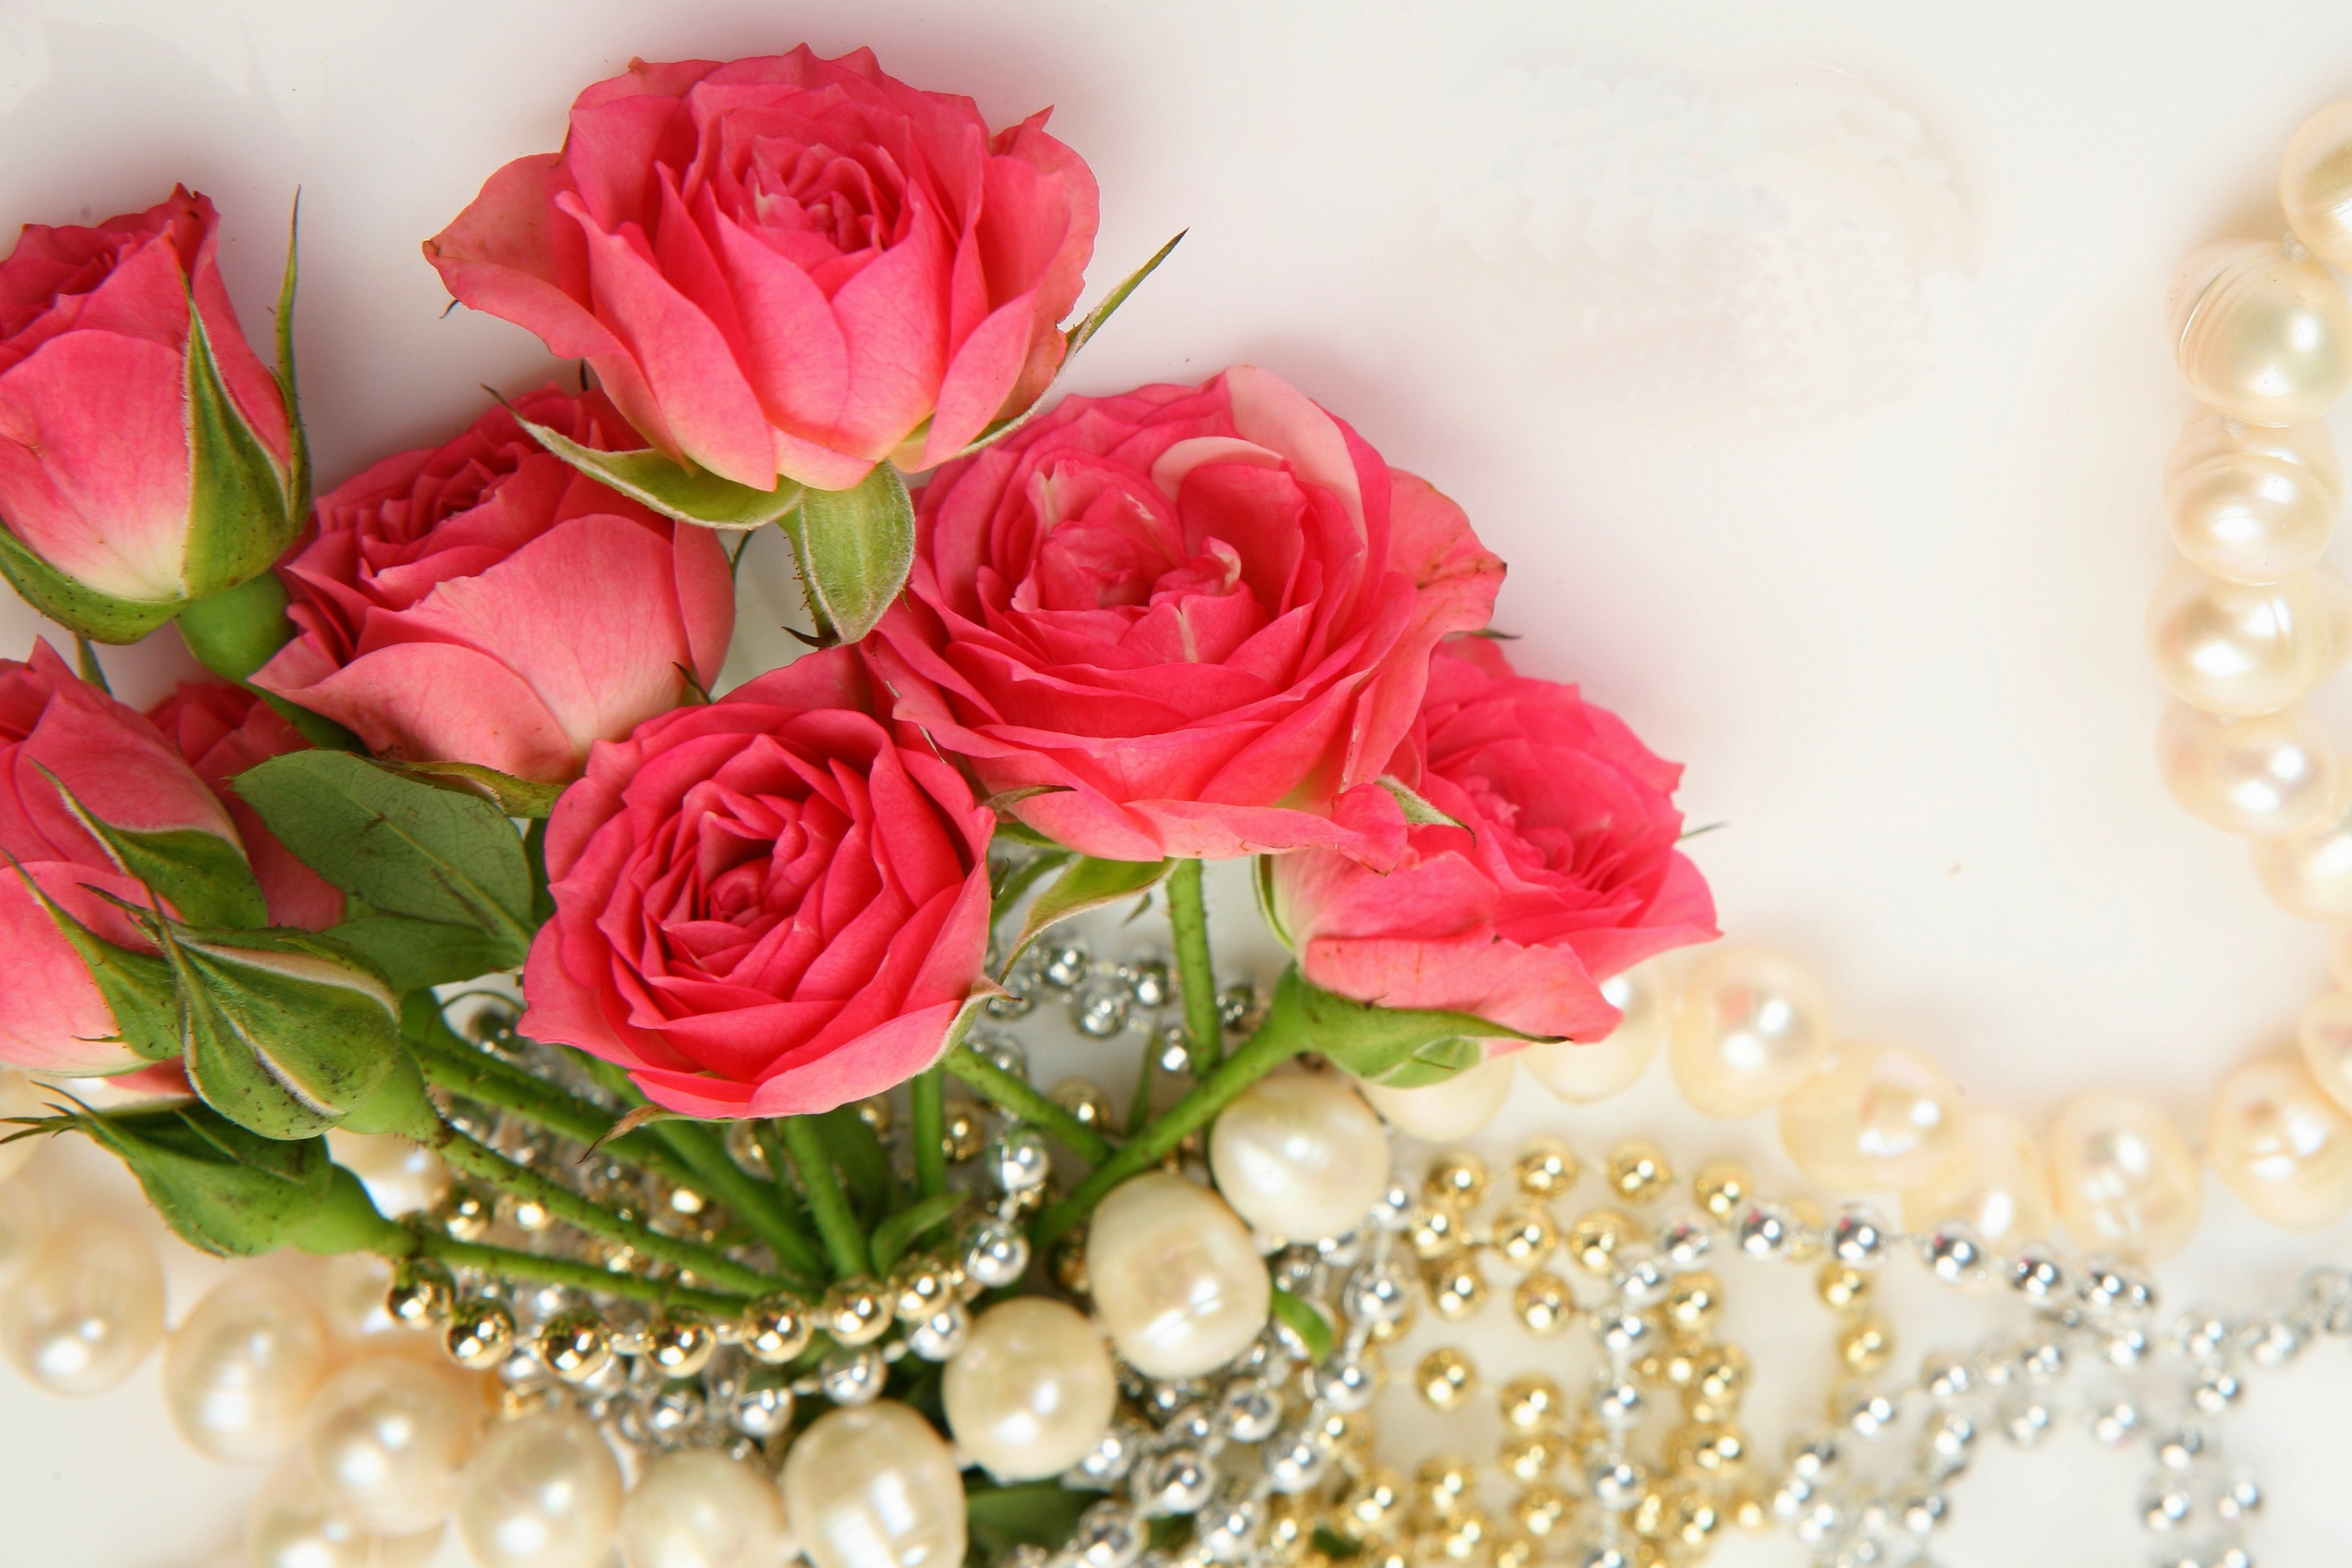 Necklace and Roses Bouquet screenshot #1 2880x1920